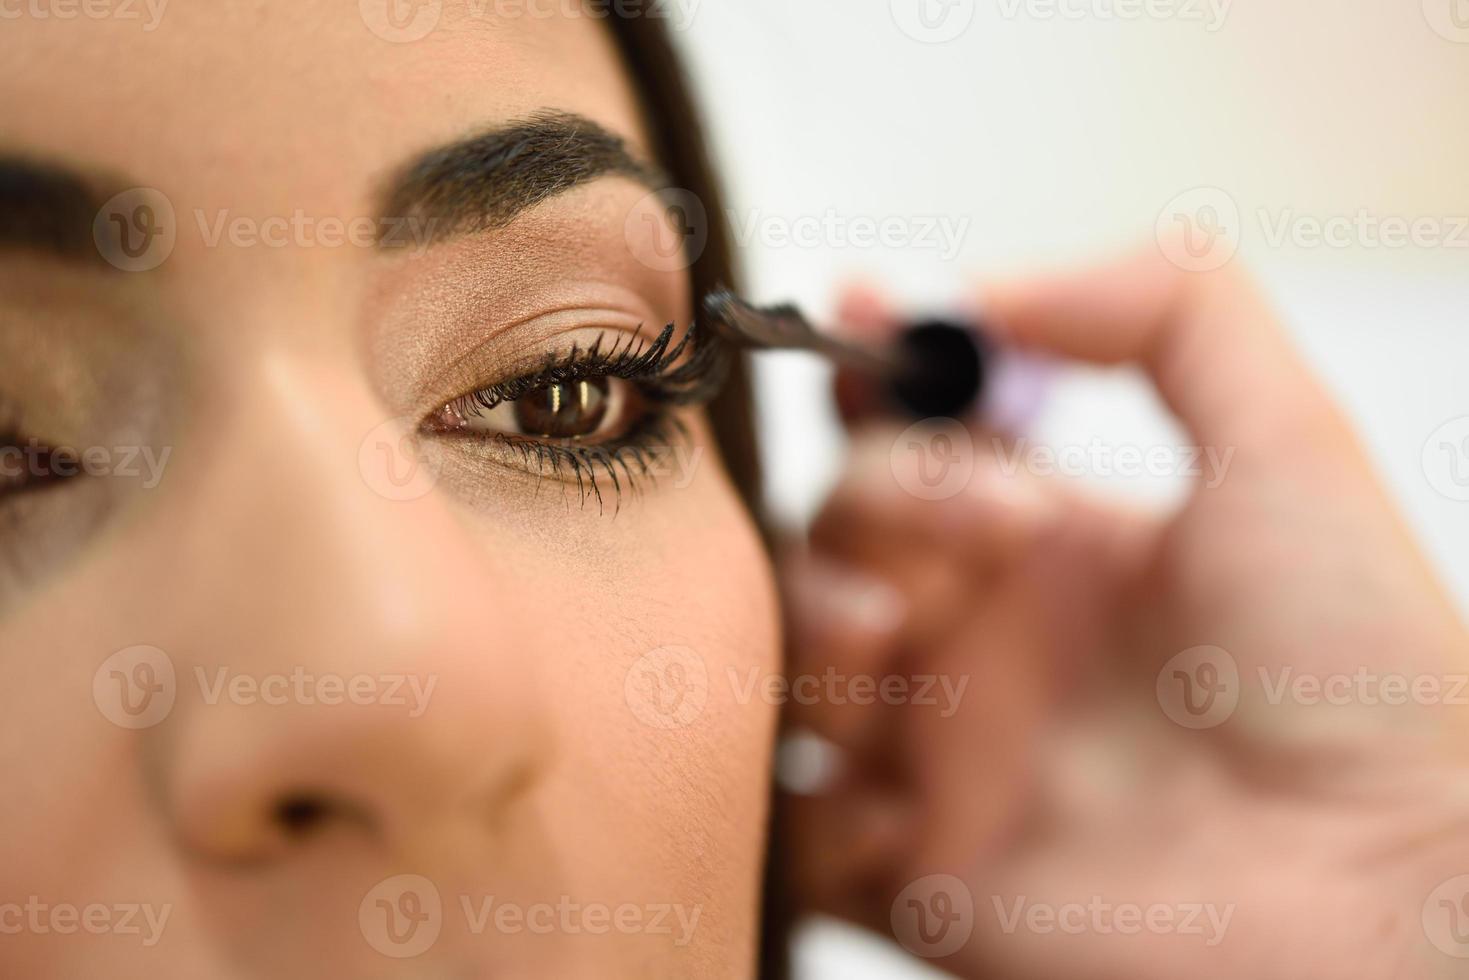 Make-up artist putting on the eyelashes of an African woman photo